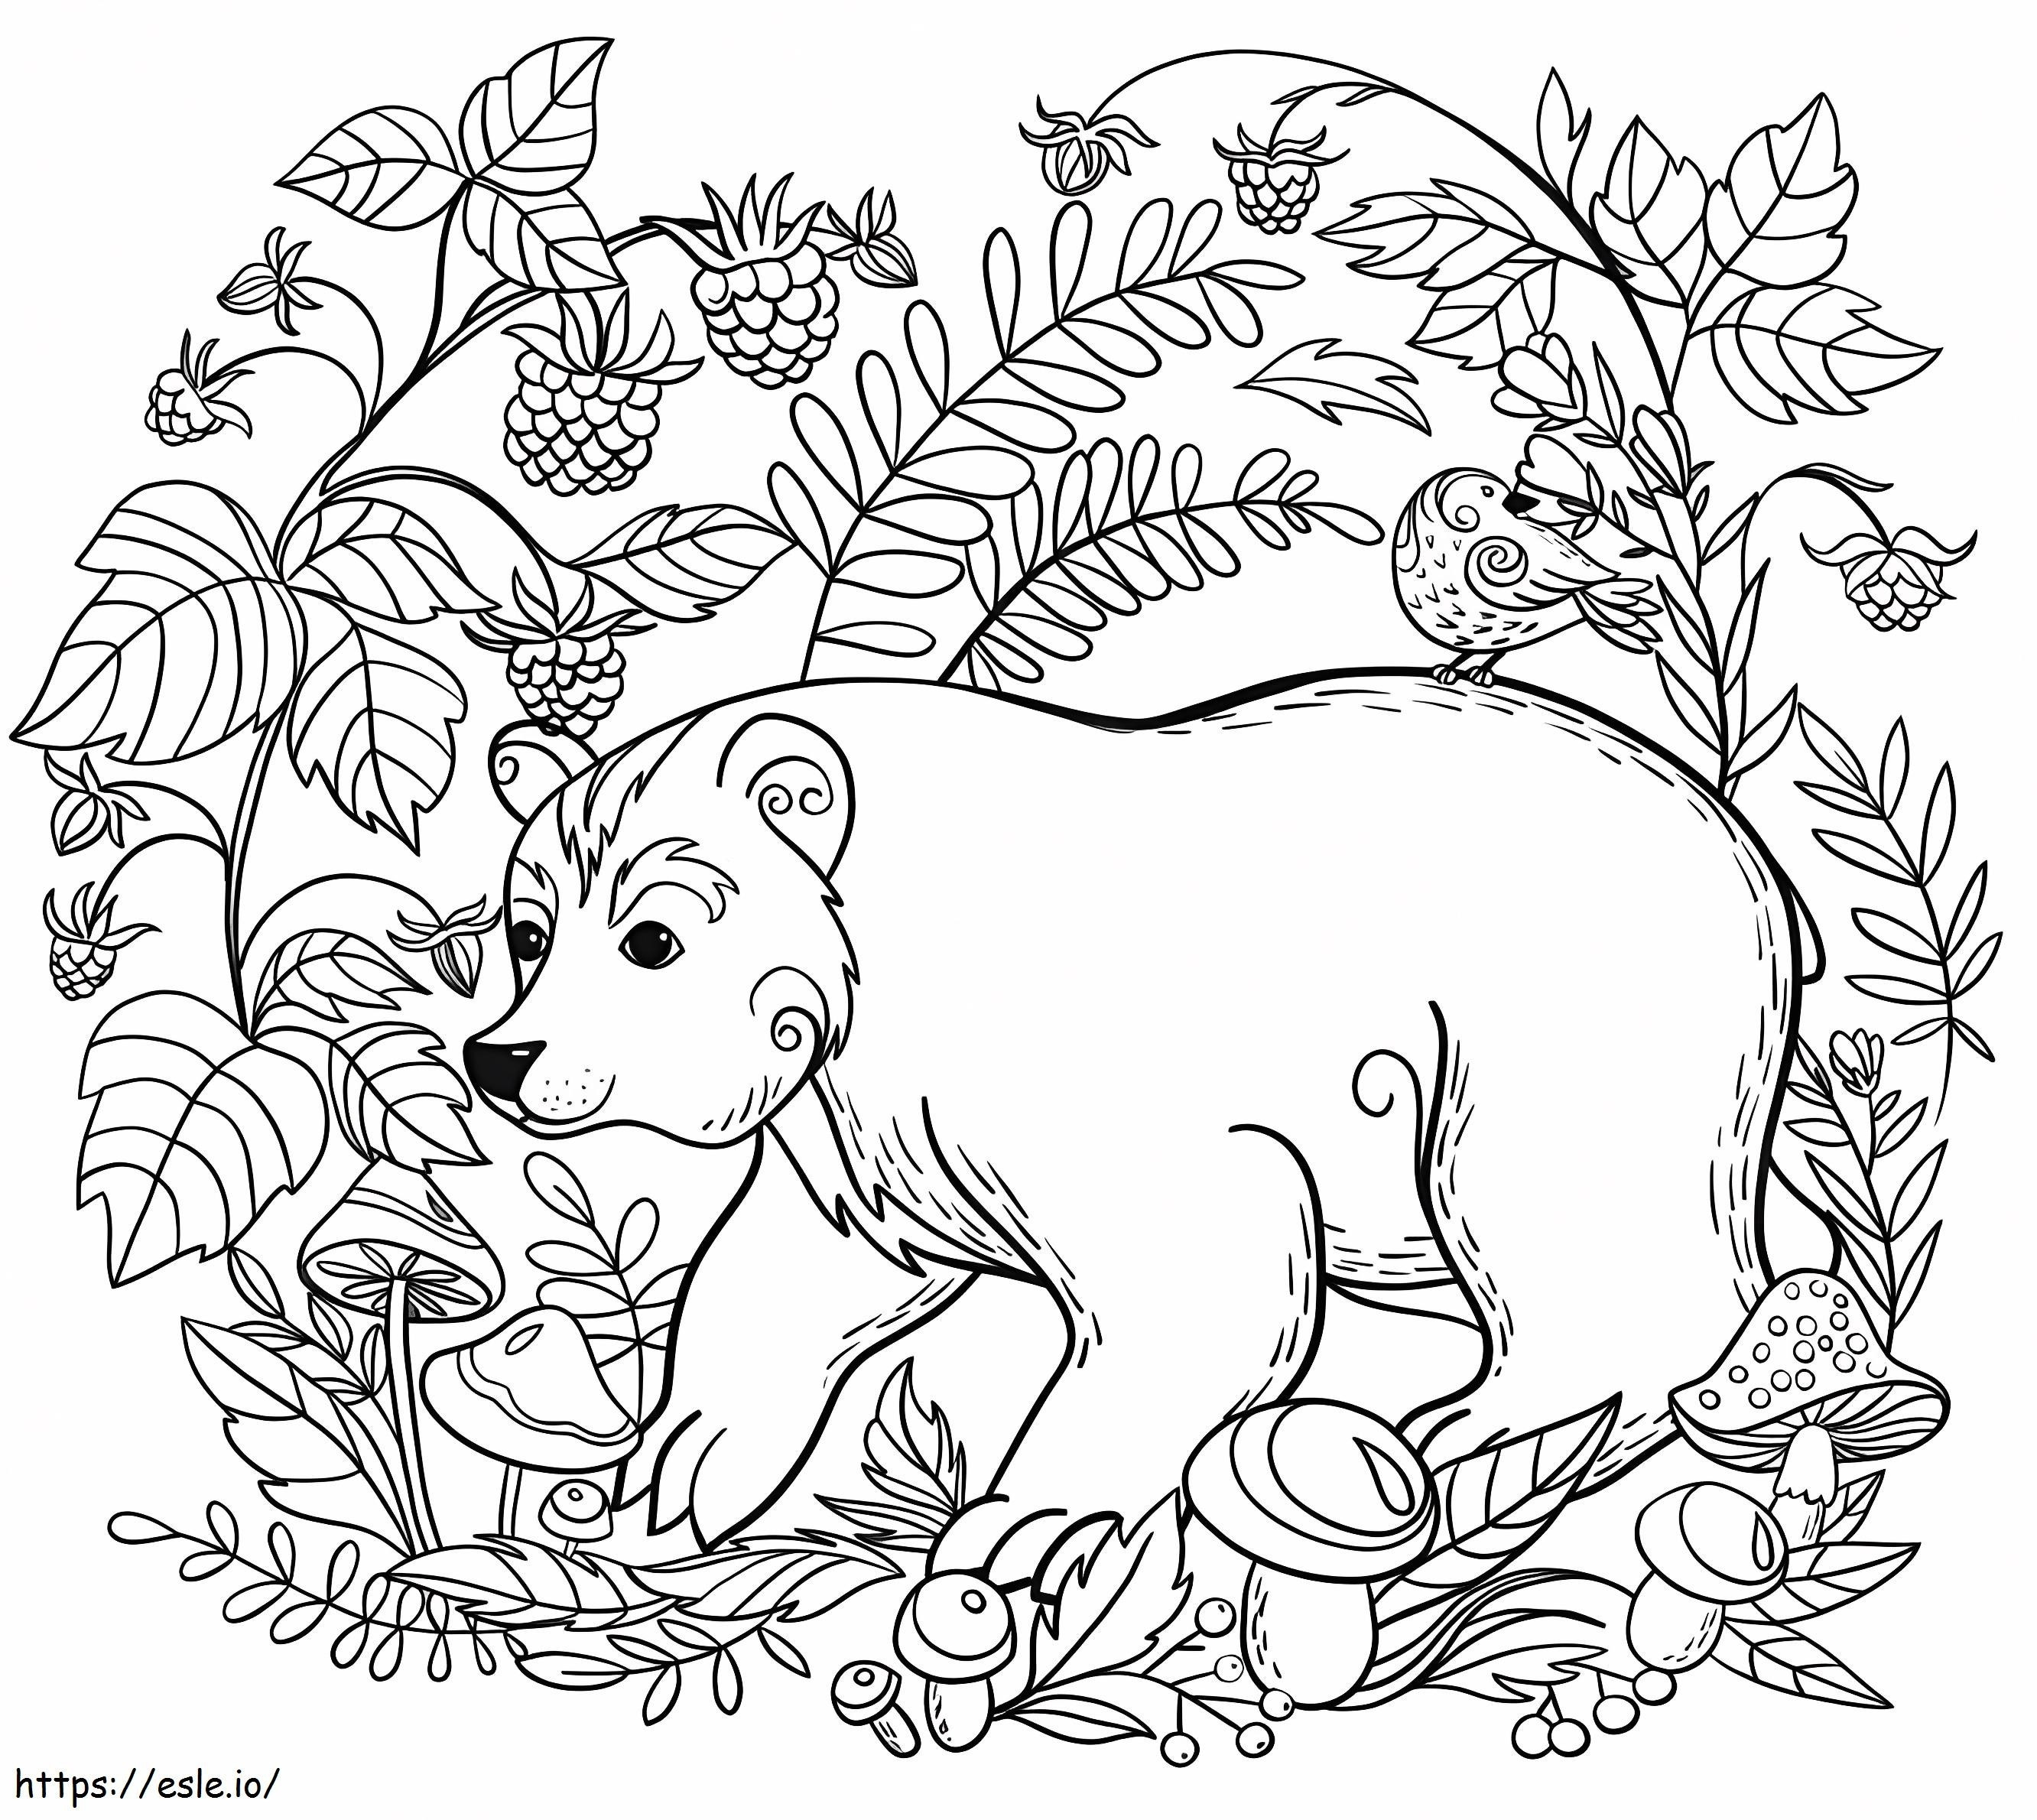 Bear And Leaf coloring page